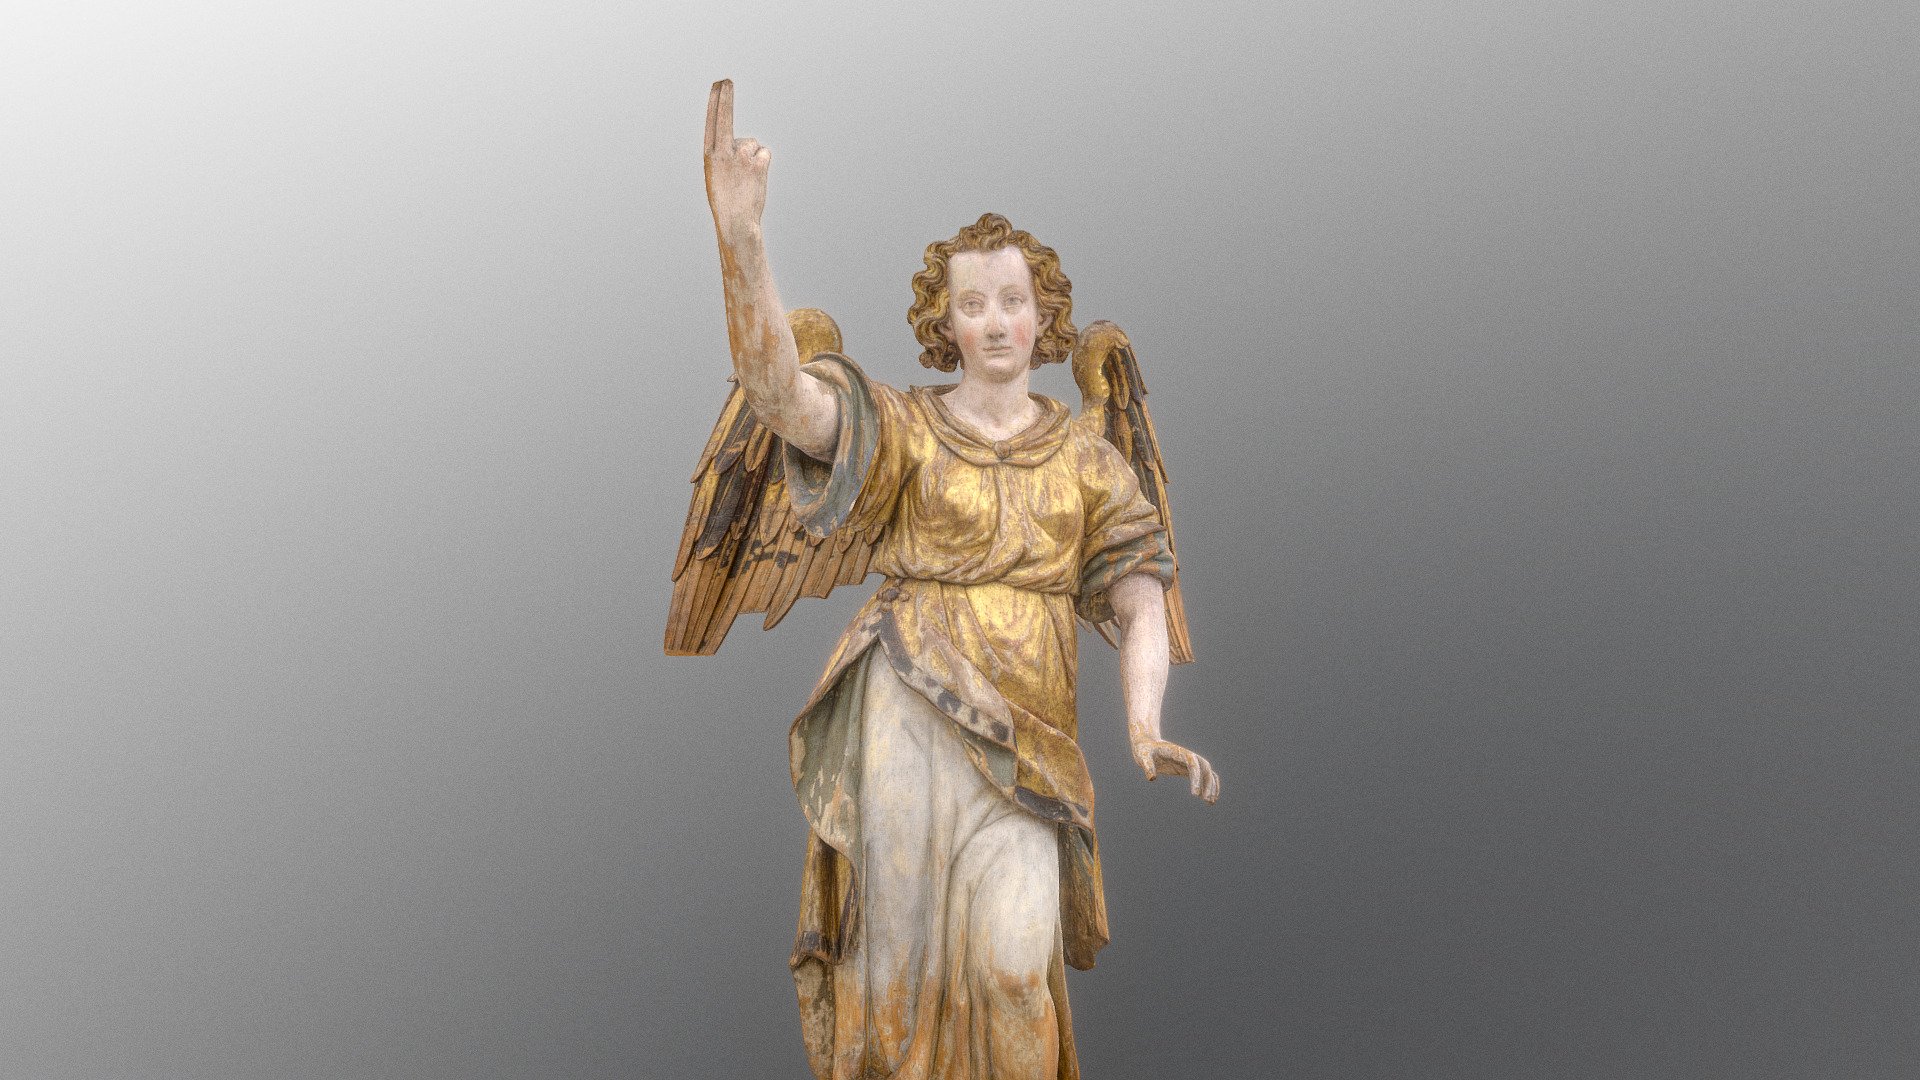 Renaissance angel church wooden wood carving statue sculpture, dated 1604 - unidentified (german) artist, with polychrome golden coating, antique museum item, originally placed underneath pulpit stand of Krasne Brezno church, Czechia - now located in municipal museum

Remastered version of 2020 scan - https://skfb.ly/6ROTE

Church virtual tour: https://www.kostel-krasnebrezno.cz
Model Commissioned by the Municipal Museum of Ústí nad Labem

NIRA app viewver test: https://pavelmatousek.nira.app/a/SvlNbqTATuiAfp2VGjOnCw/1 

photogrammetry scan (220 x 24MP, 4x8K textures) , photos by Pavel Matoušek + Aleš Bárta - Rennaisance church angel statue - 3D model by matousekfoto 3d model